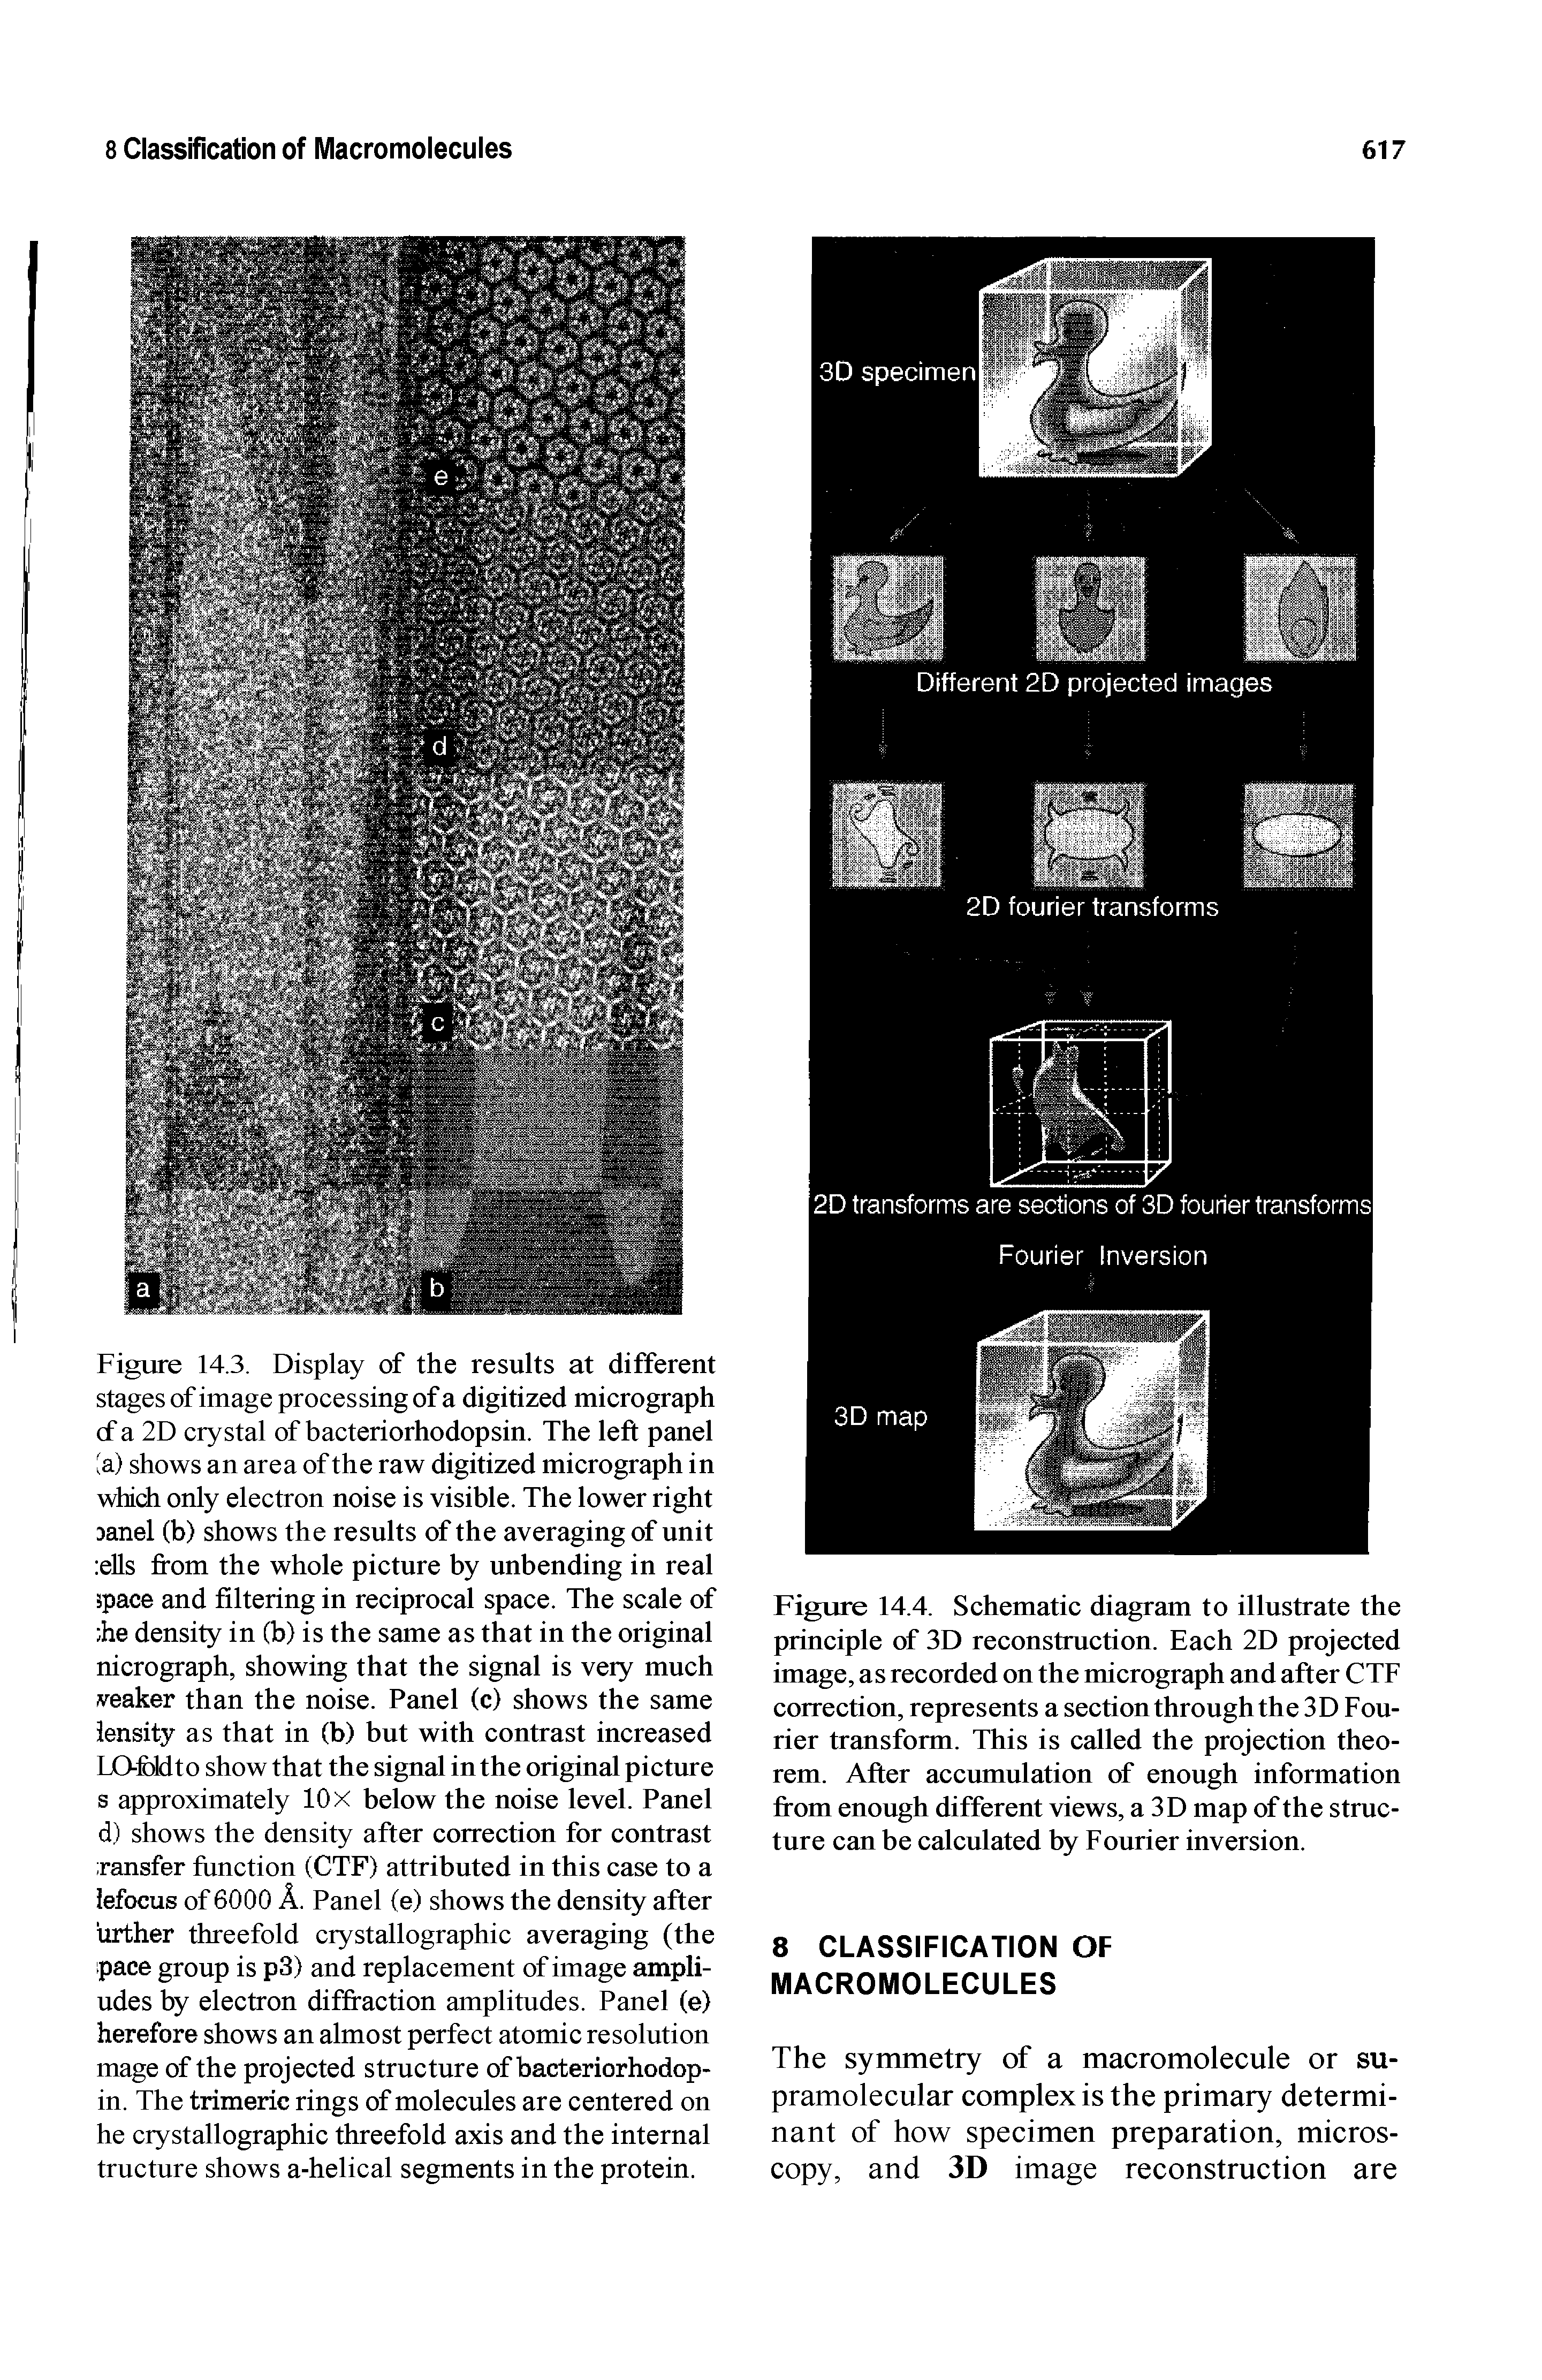 Figure 14.4. Schematic diagram to illustrate the principle of 3D reconstruction. Each 2D projected image, as recorded on the micrograph and after CTF correction, represents a section through the 3D Fourier transform. This is called the projection theorem. After accumulation of enough information from enough different views, a 3D map of the structure can be calculated by Fourier inversion.